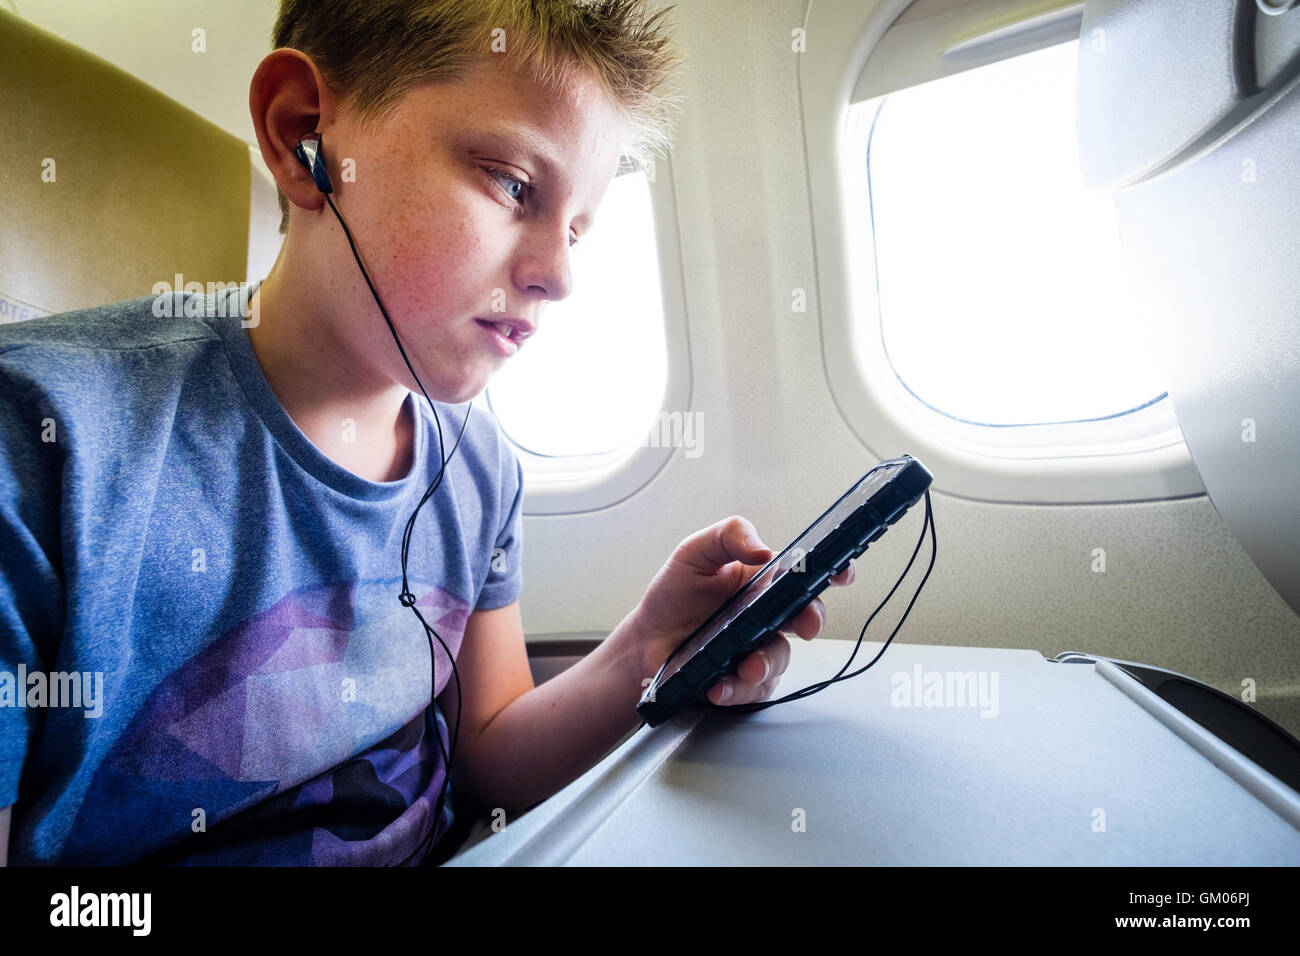 A teenage boy using his mobile phone during the flight on a plane to listen to music Stock Photo